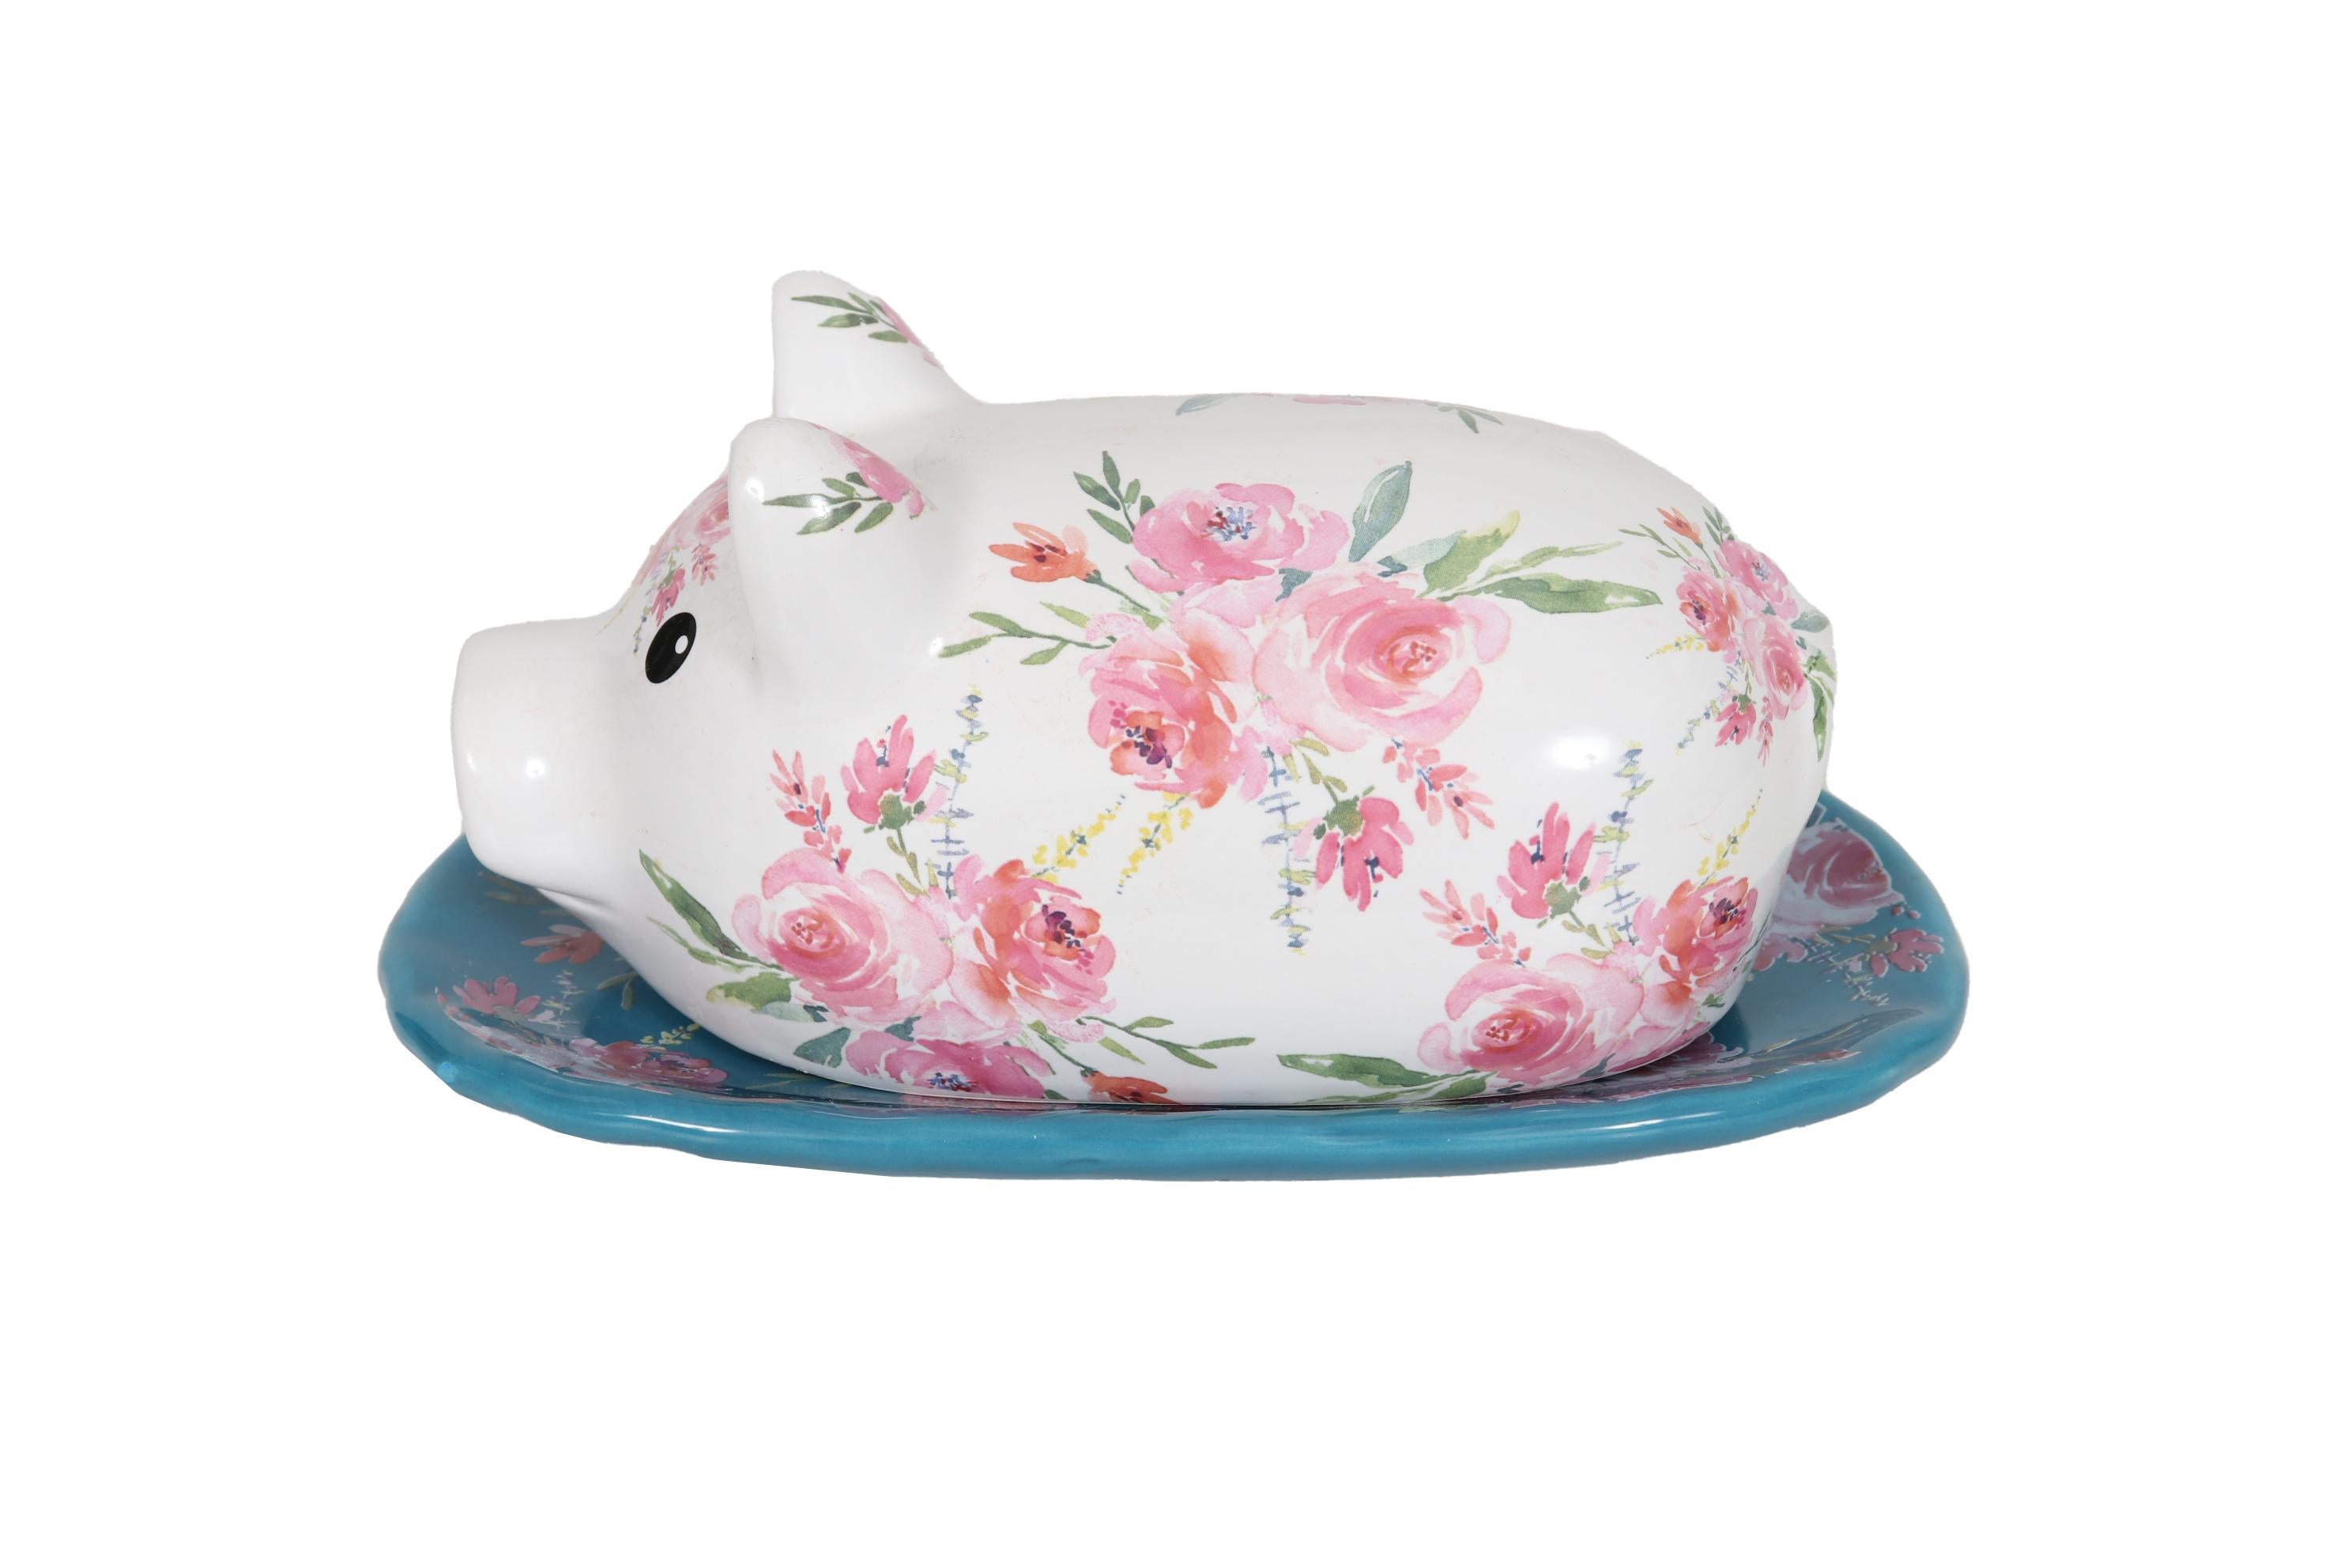 A floral ceramic transferware butterdish shaped like a pig. The lid is pressed with simple details to show the snout, ears and tail, and decorated with pink roses over a white background. The tray is blue and covered with matching pink roses.